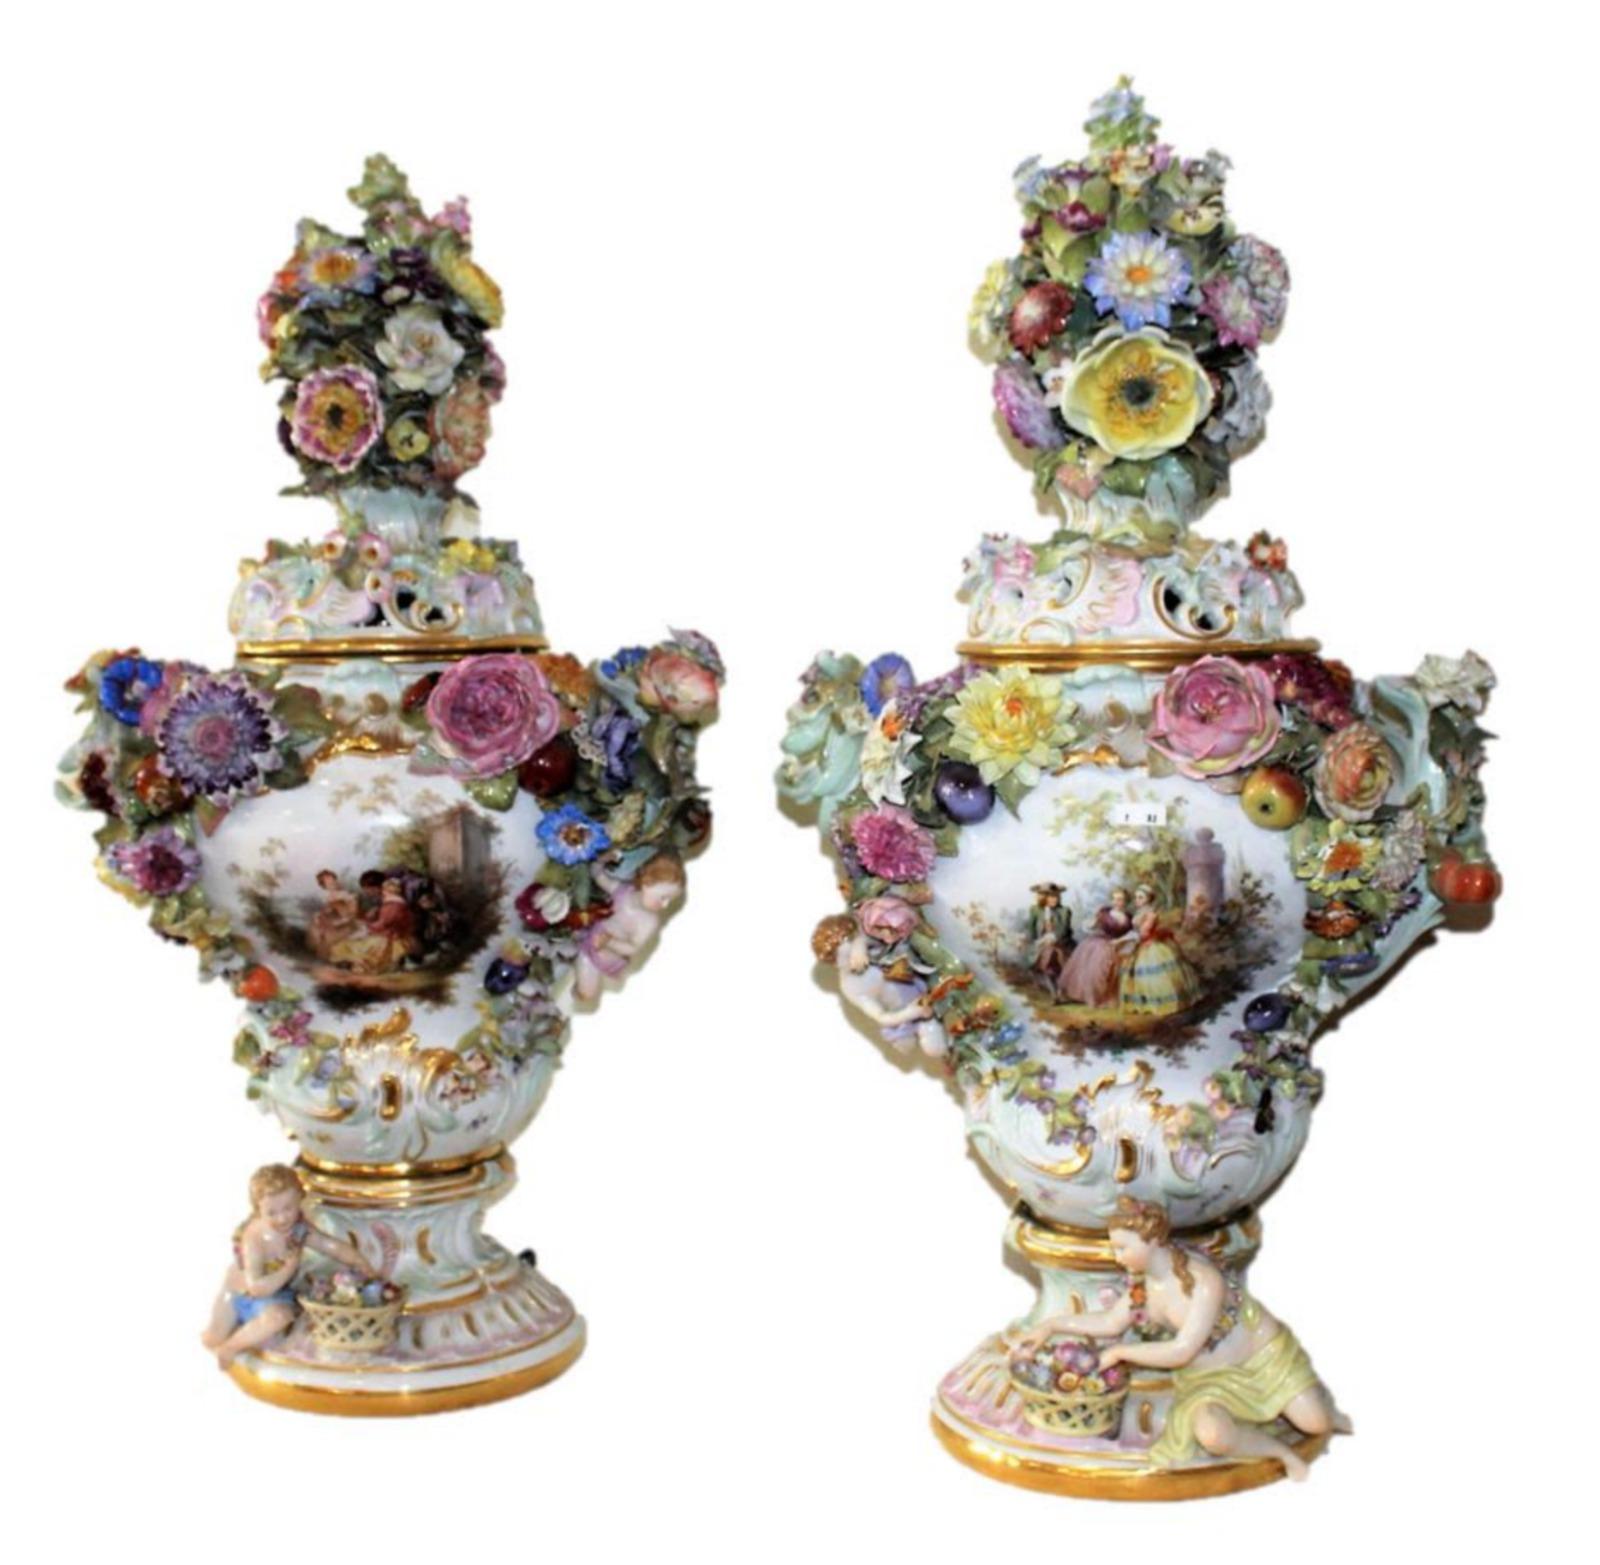 Imposing pair of Amphora in German Meissen porcelain, 18th century. 

Pair of amphoras in German Meissen porcelain from the 18th century each lid perforated in rocaille surmounted by a large bouquet, painted in the style of Watteau, the reverse